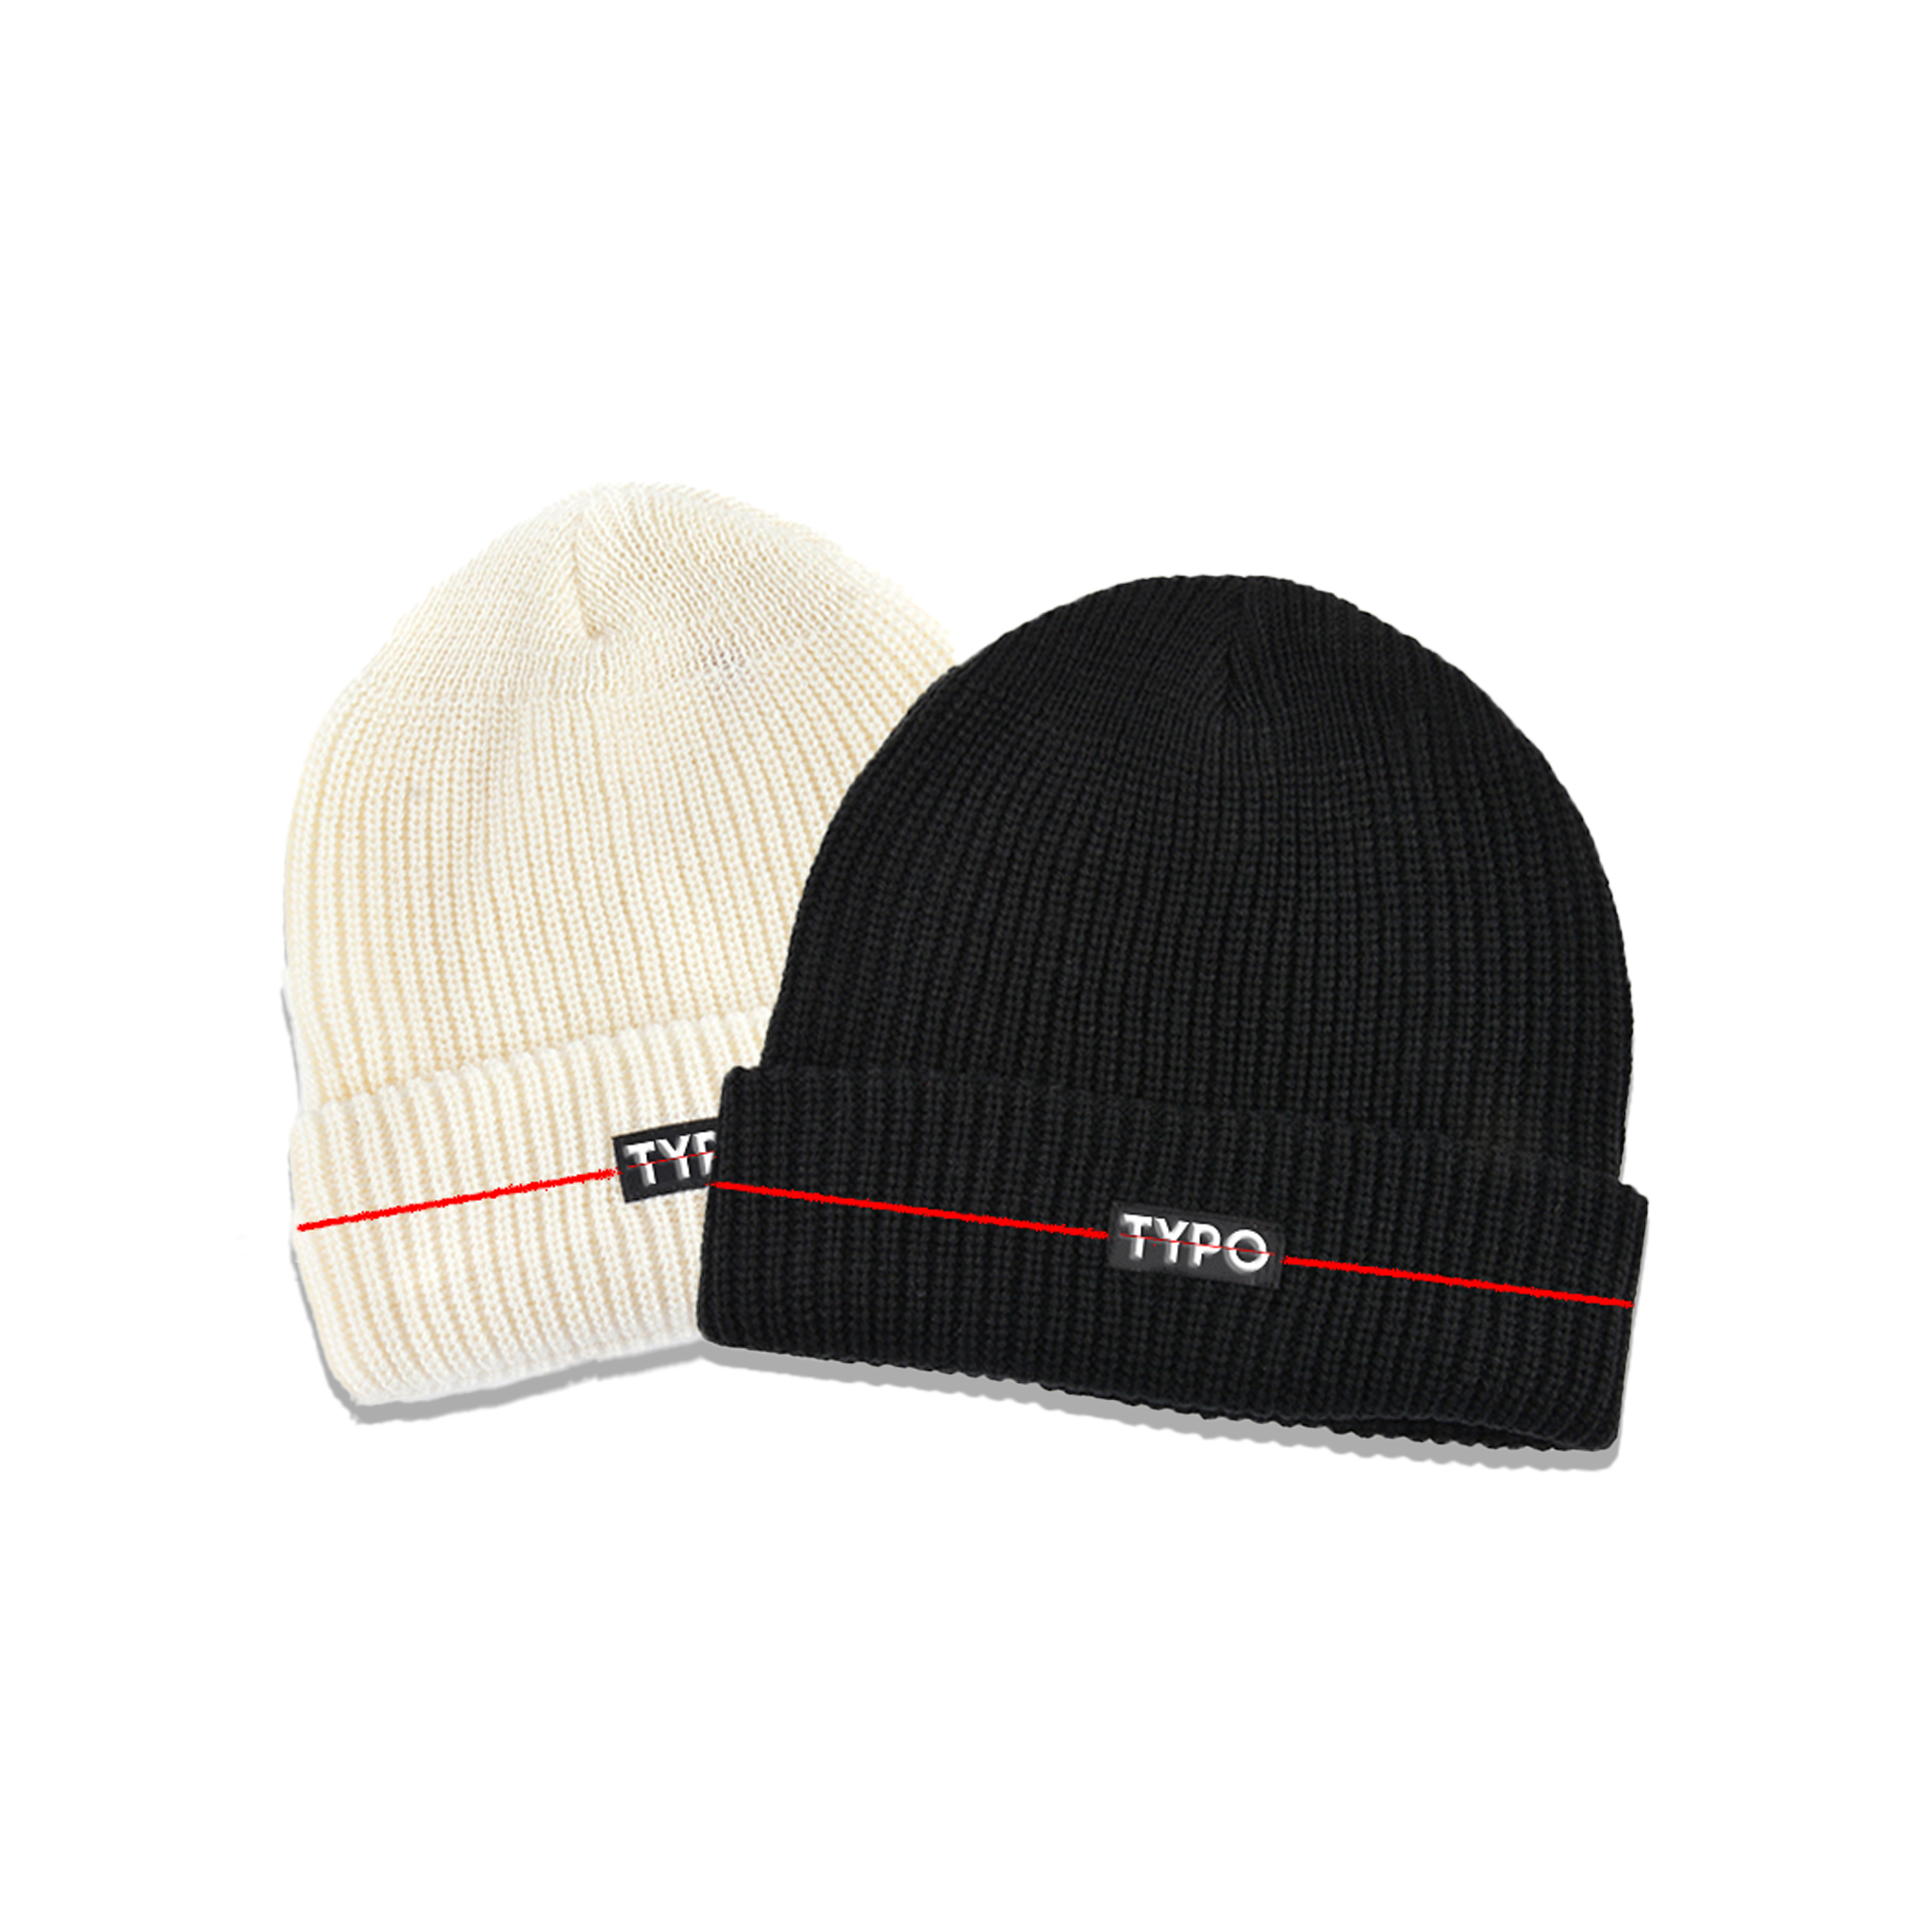 designer patched beanies —